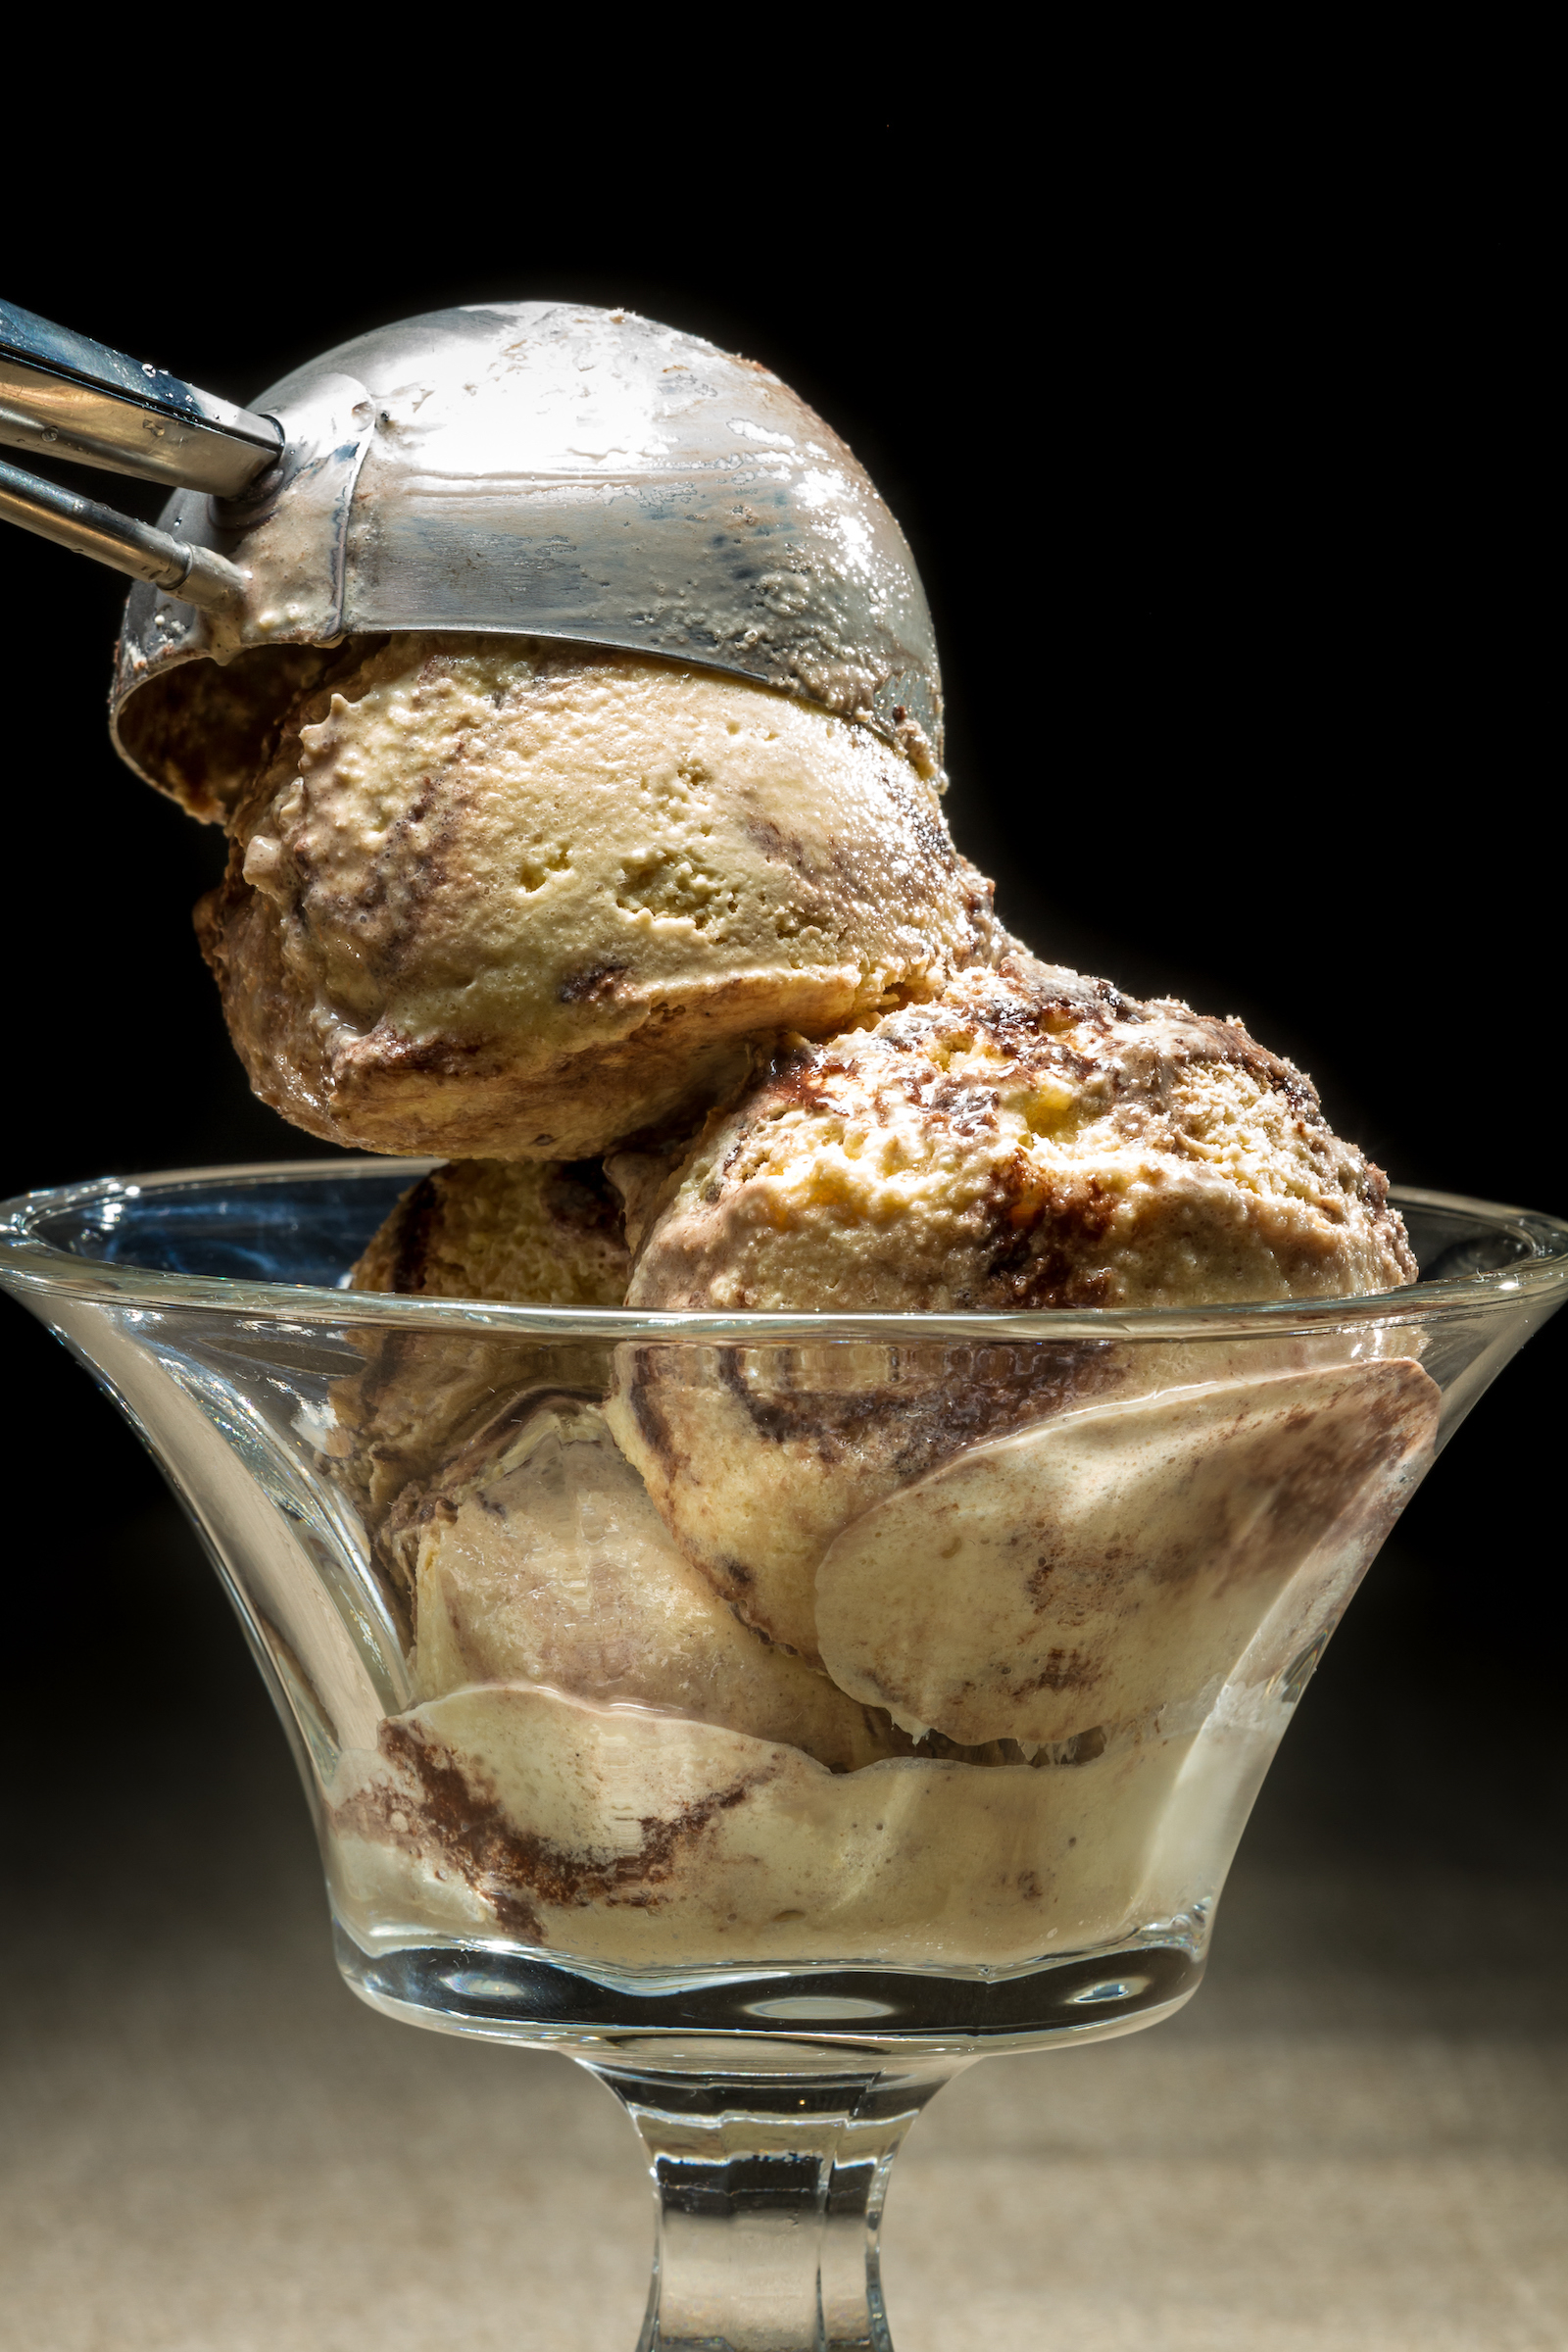 Closeup of ice cream being scooped into a bowl